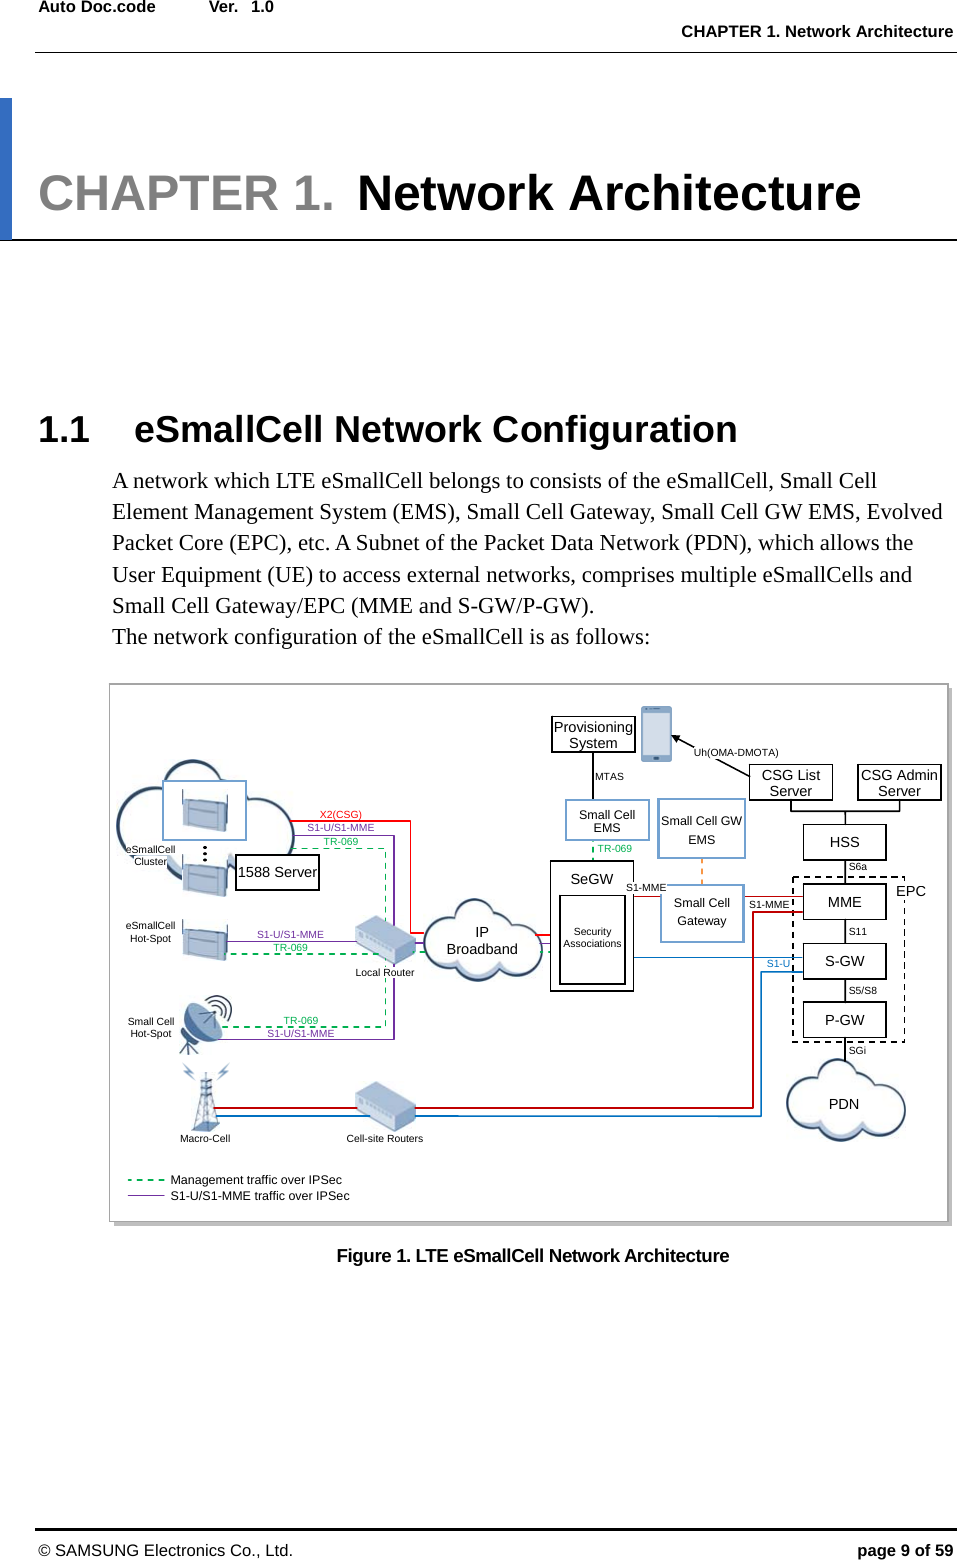  Ver.  CHAPTER 1. Network Architecture © SAMSUNG Electronics Co., Ltd.  page 9 of 59 Auto Doc.code  1.0 CHAPTER 1. Network Architecture      1.1  eSmallCell Network Configuration A network which LTE eSmallCell belongs to consists of the eSmallCell, Small Cell Element Management System (EMS), Small Cell Gateway, Small Cell GW EMS, Evolved Packet Core (EPC), etc. A Subnet of the Packet Data Network (PDN), which allows the User Equipment (UE) to access external networks, comprises multiple eSmallCells and Small Cell Gateway/EPC (MME and S-GW/P-GW).   The network configuration of the eSmallCell is as follows:  Figure 1. LTE eSmallCell Network Architecture  HSS MME S-GW P-GW CSG List Server  CSG Admin Server Provisioning System IP Broadband 1588 Server Local Router Management traffic over IPSec S1-U/S1-MME traffic over IPSec Cell-site Routers Macro-Cell Small Cell Hot-Spot eSmallCell Hot-Spot eSmallCell Cluster X2(CSG) S1-U/S1-MME TR-069 S1-U/S1-MME TR-069 TR-069 S1-U/S1-MME TR-069 Small Cell Gateway MTAS S1-MME S1-U Uh(OMA-DMOTA) S6a S11 S5/S8 SGi SeGW Security Associations S1-MME PDN Small Cell GW EMS Small Cell EMSEPC